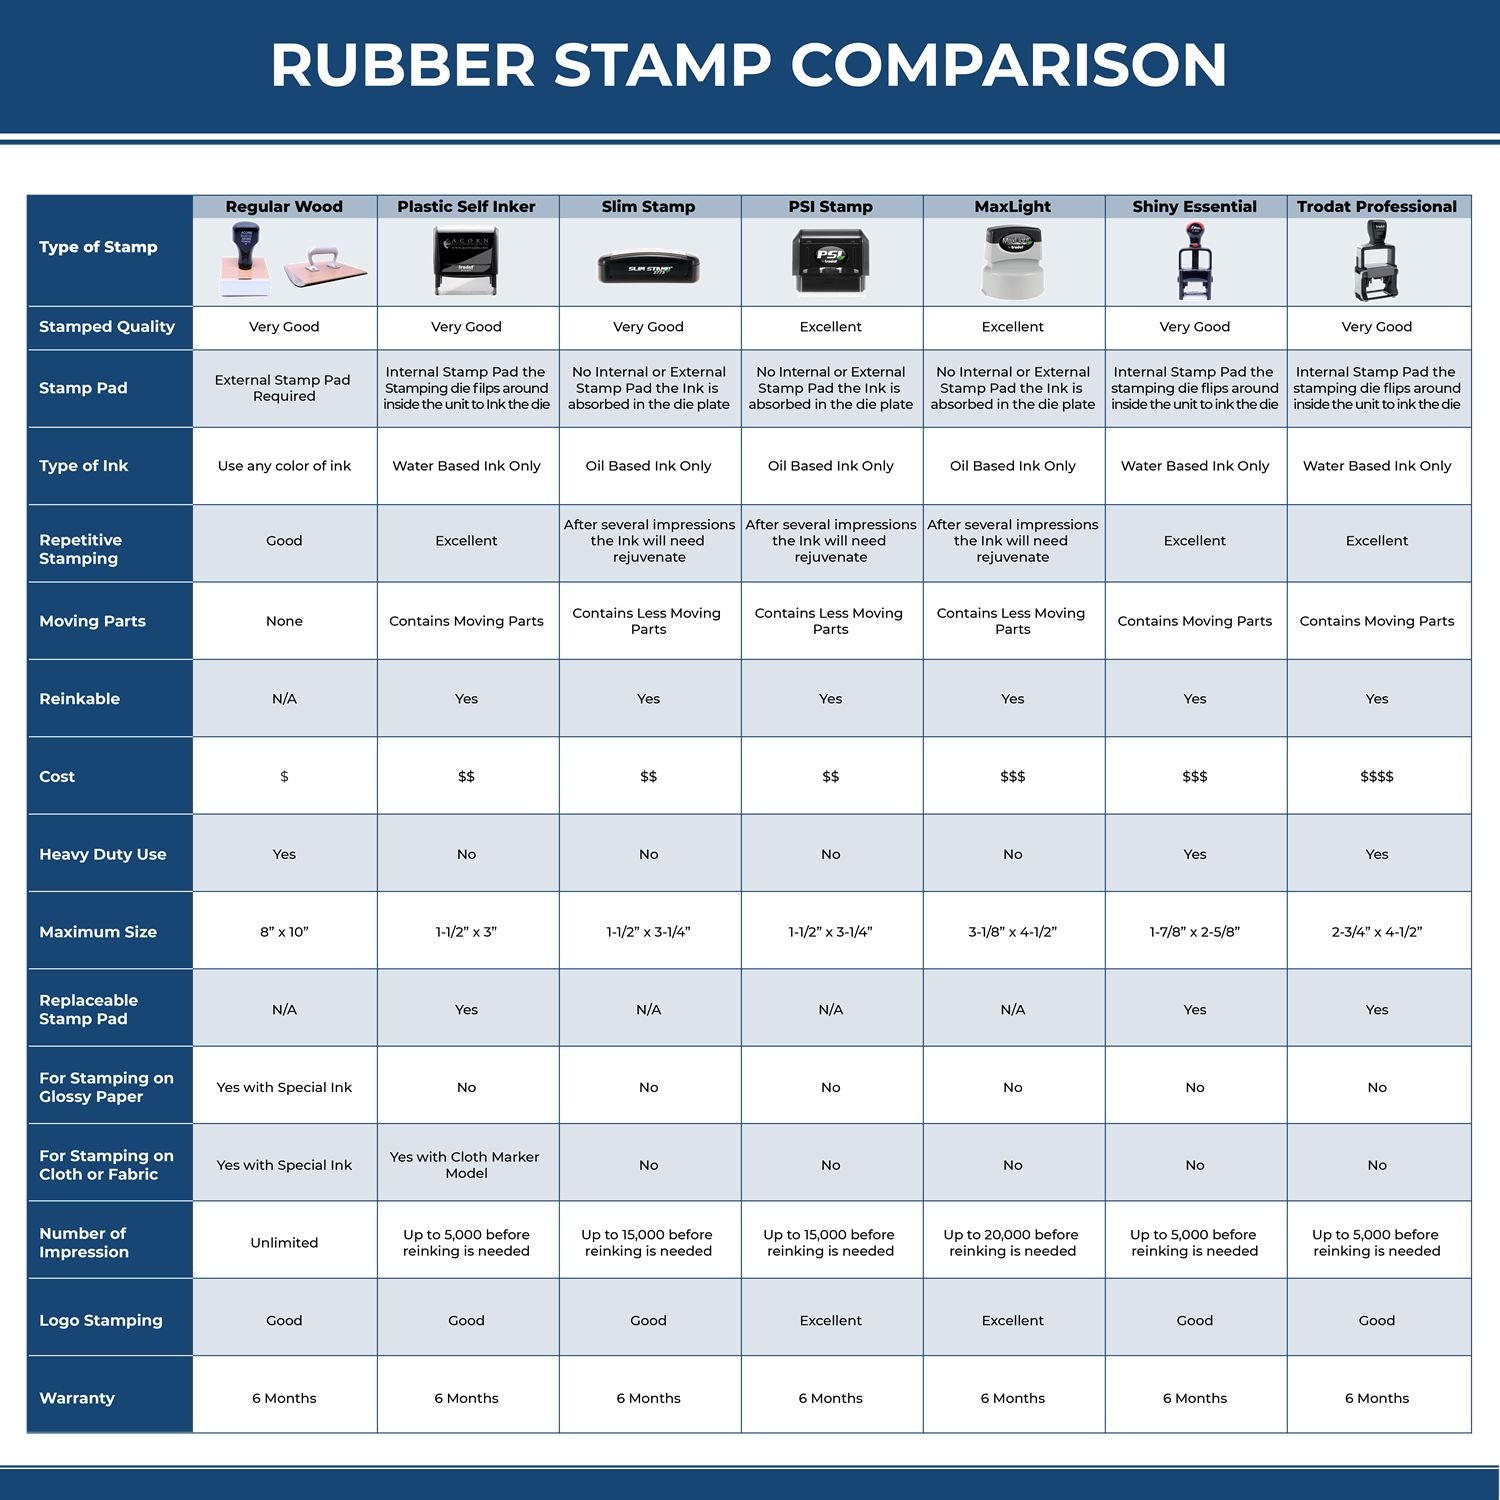 A comparison chart for the different types of mount models available for the Premium MaxLight Pre-Inked Florida Landscape Architectural Stamp.